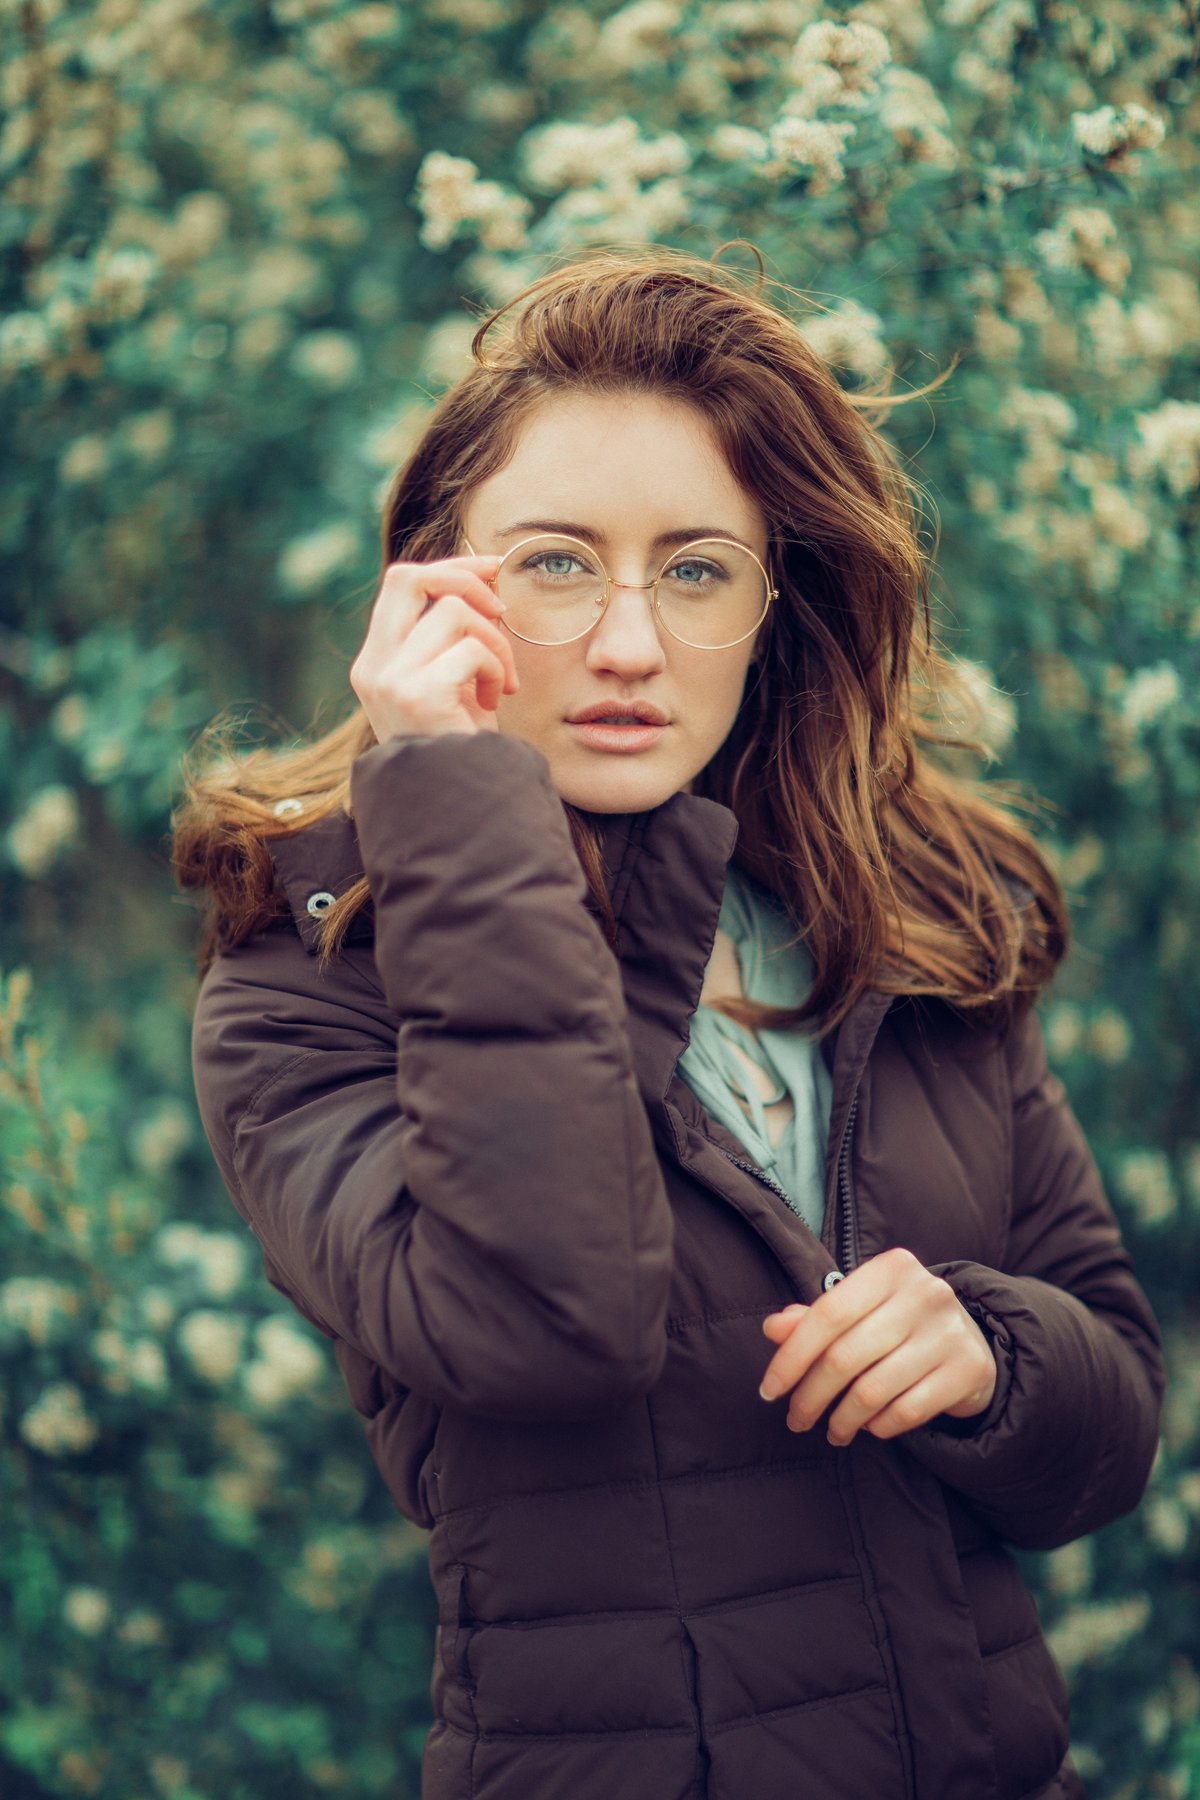 Portrait Photo Of Young Woman In Brown Coat Los Angeles